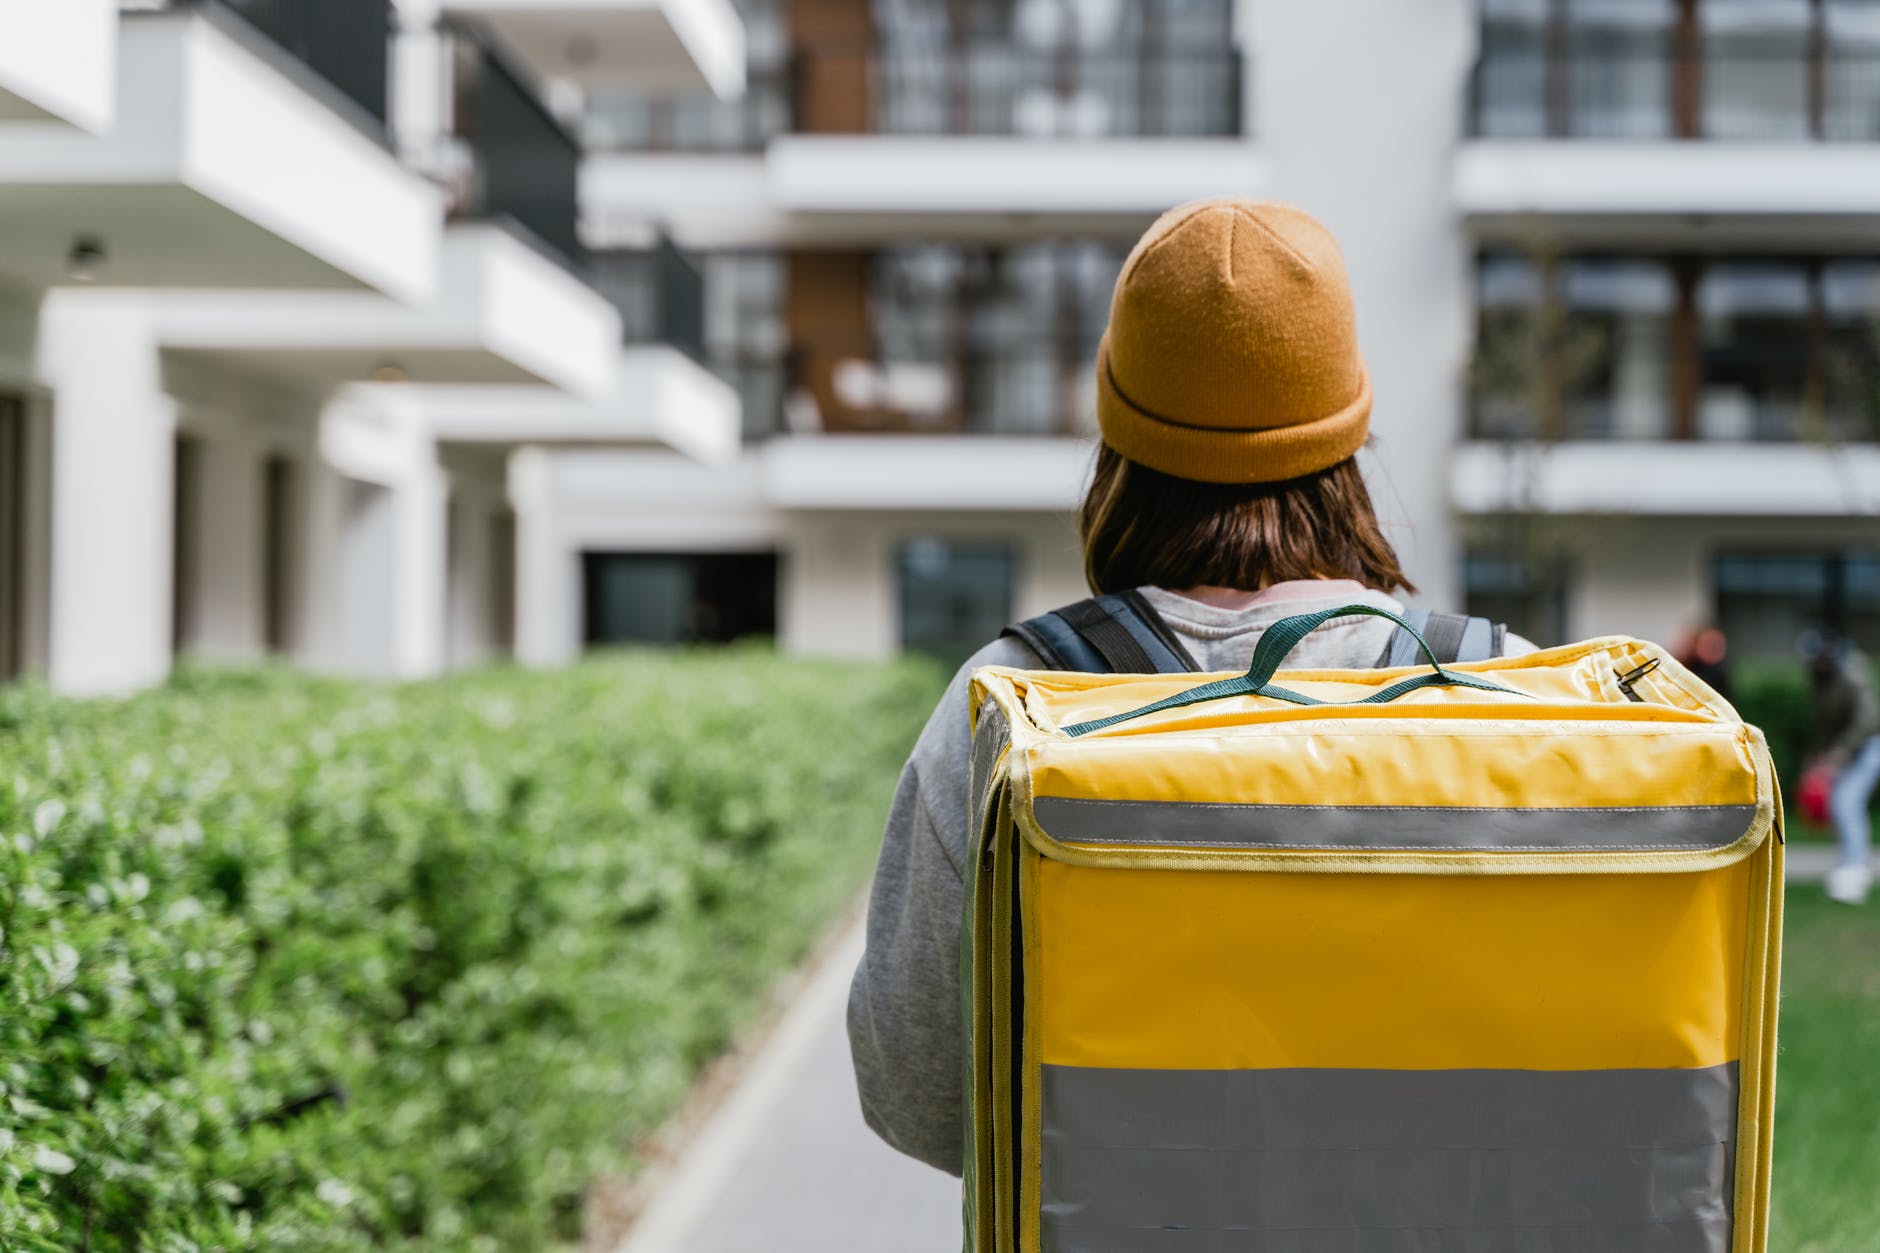 A food delivery courier brings a food delivery order to a multifamily residential building.